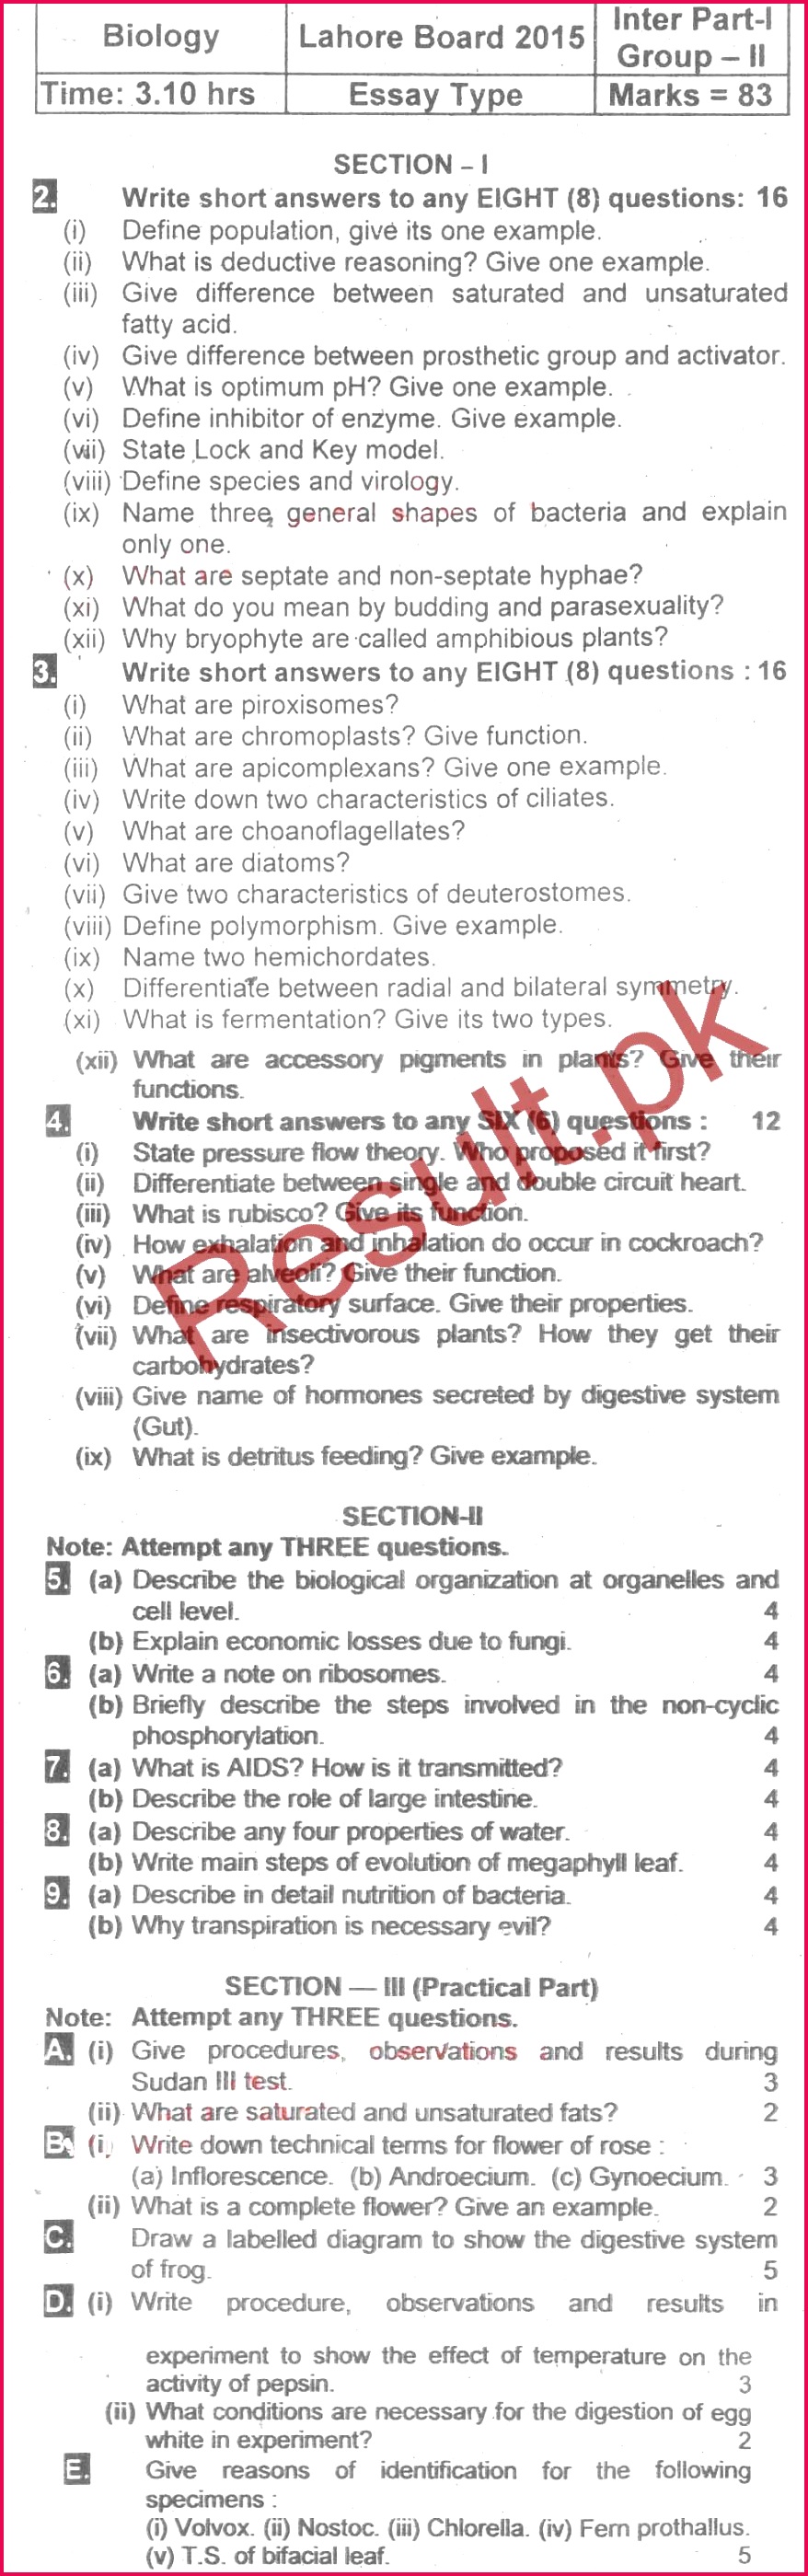 Past Papers Lahore Board 2015 Inter Part 1 Biology Subjective Group 2